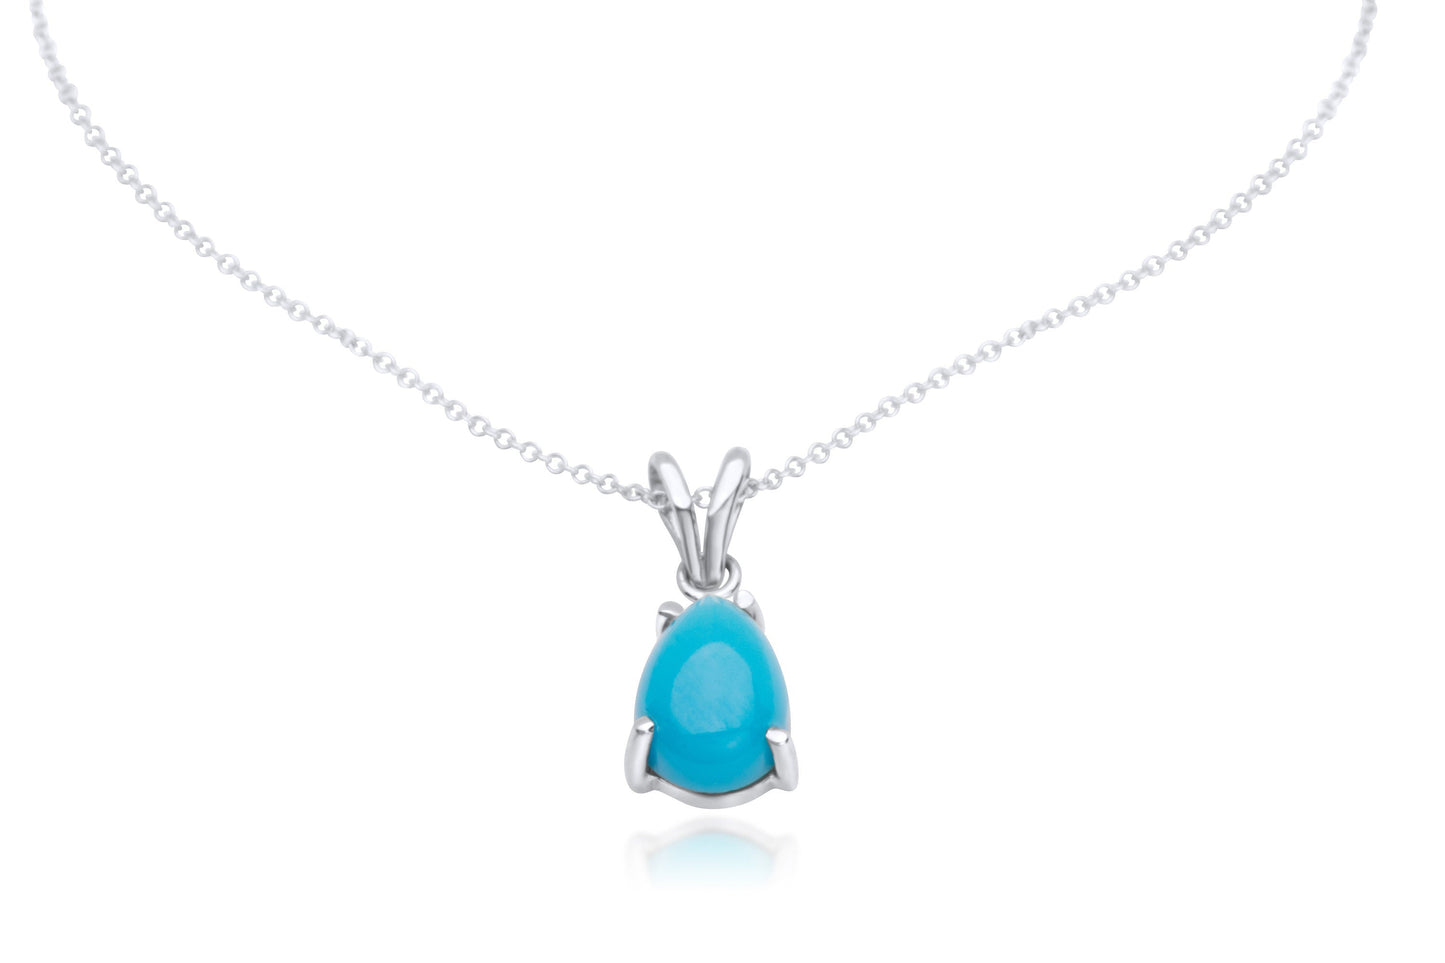 14k White Gold Turquoise Teardrop Necklace